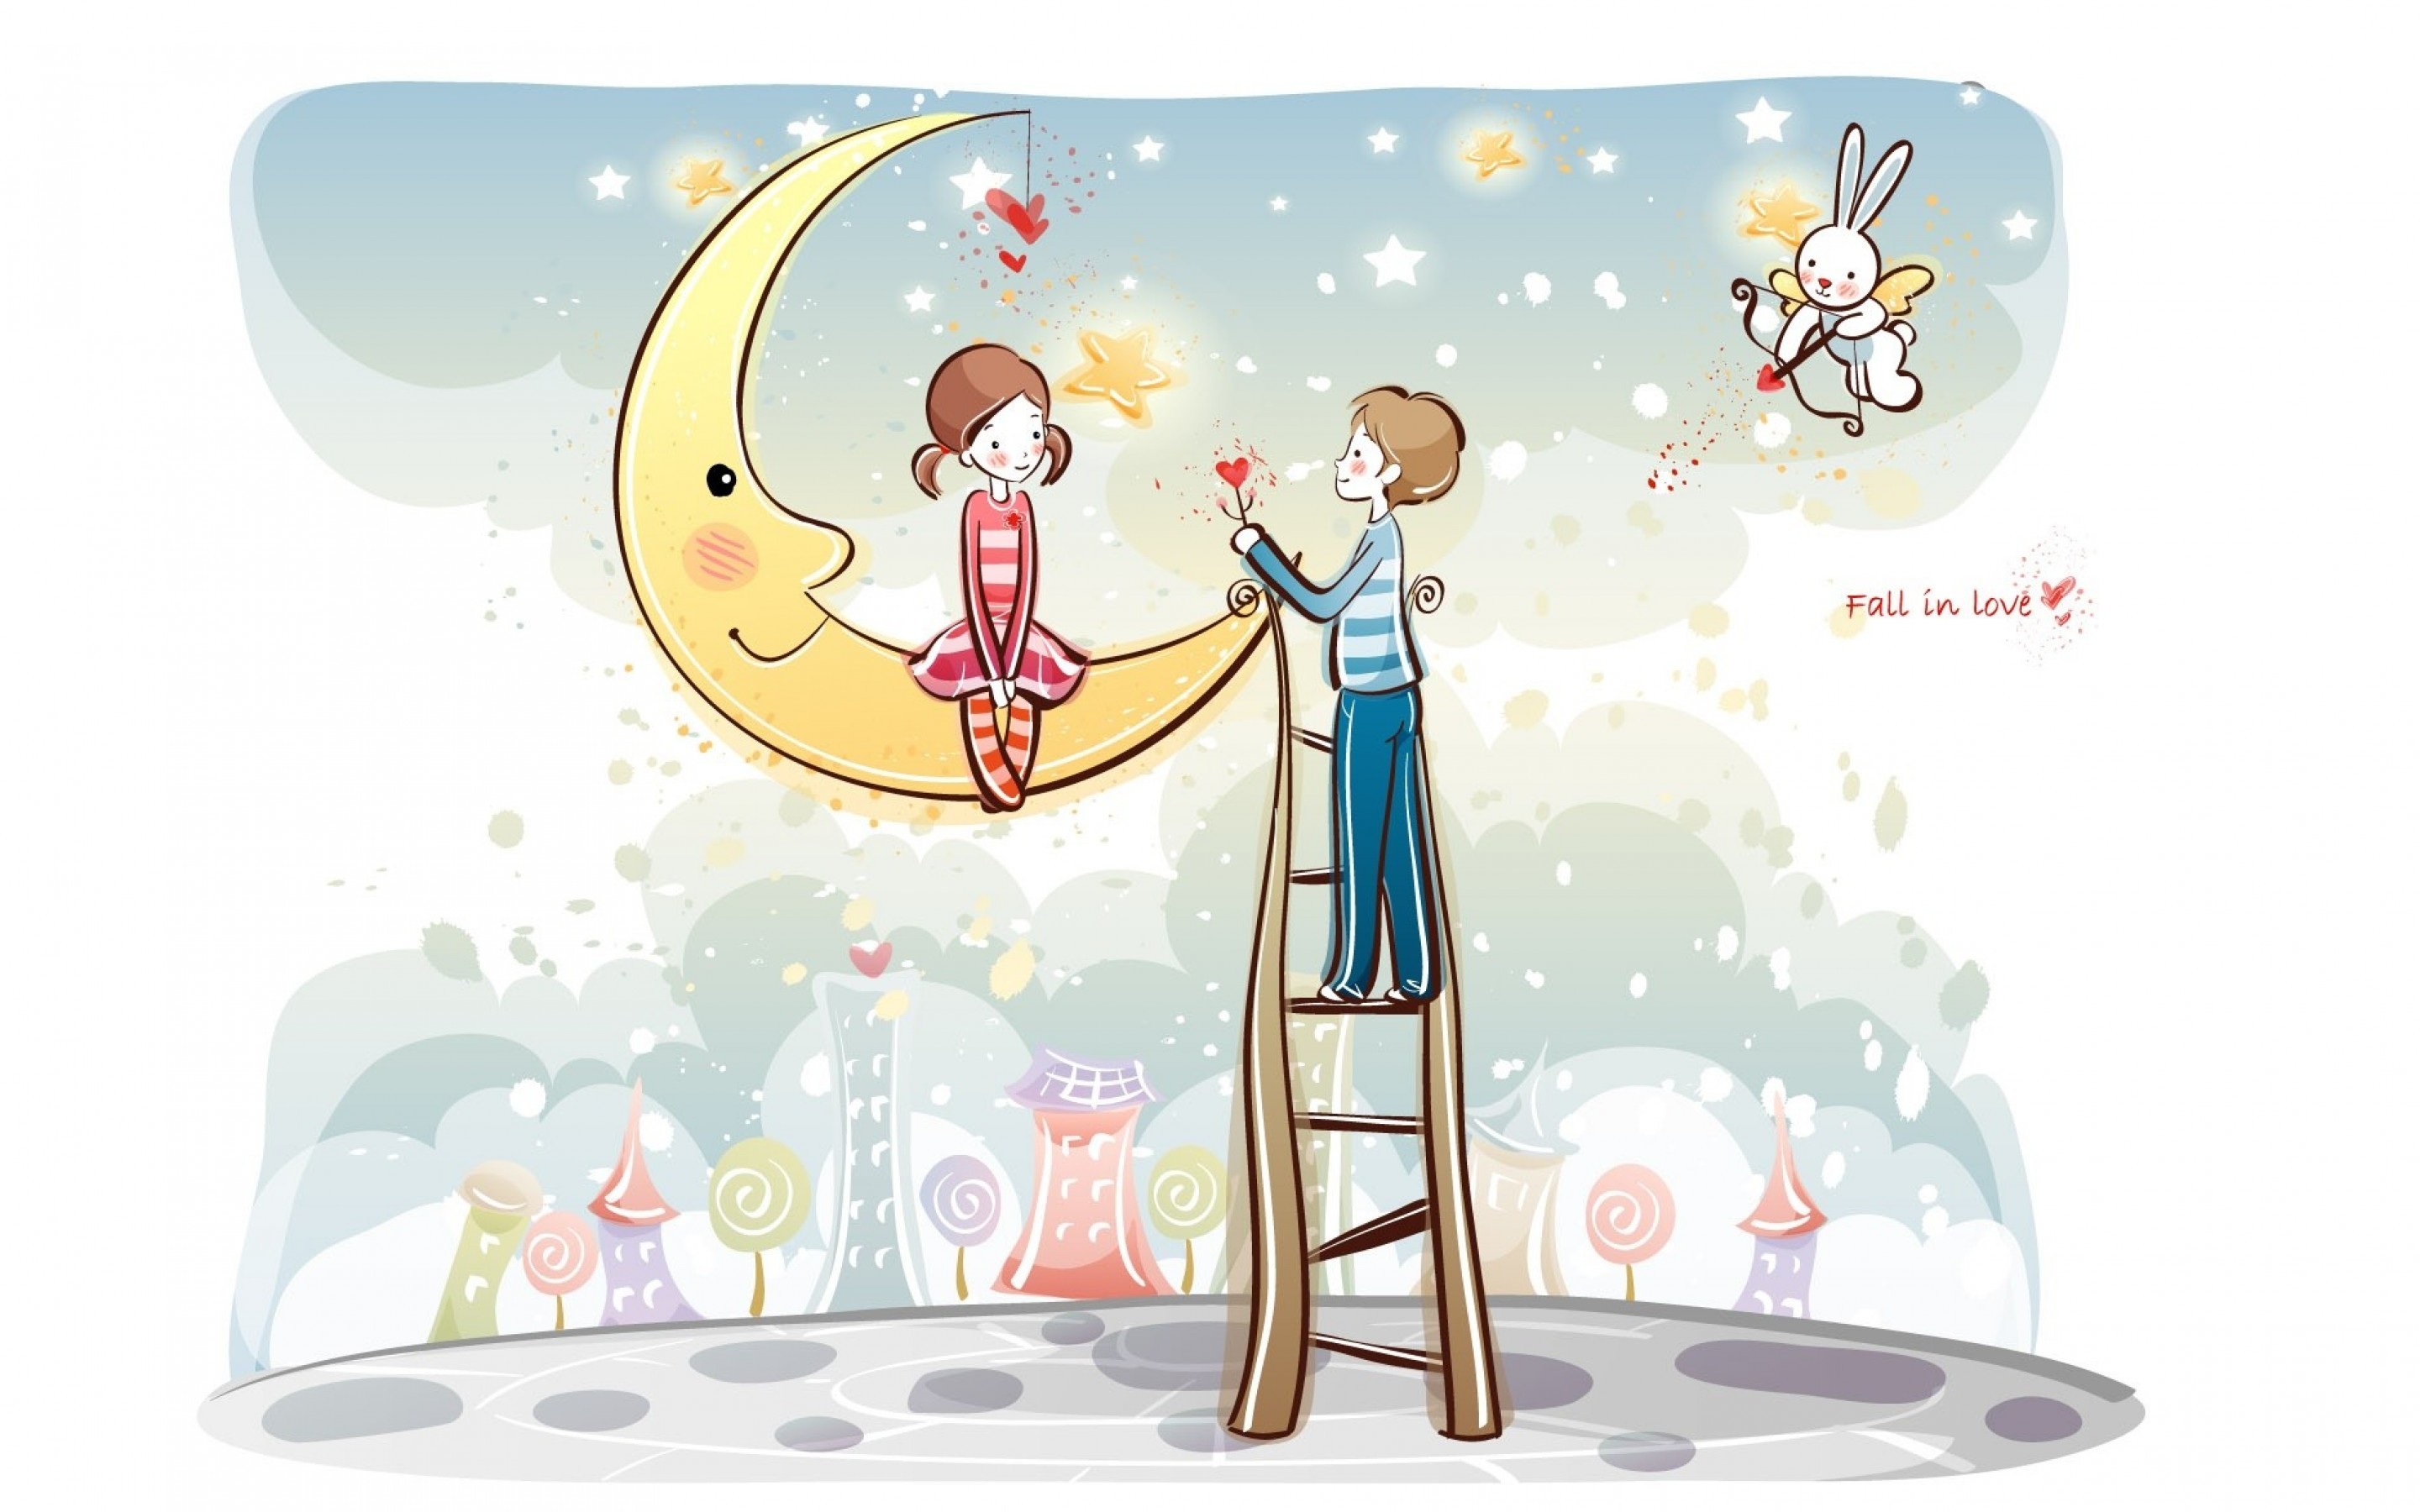 Lovely Images Of Love Couple Cartoon - bmp-internet